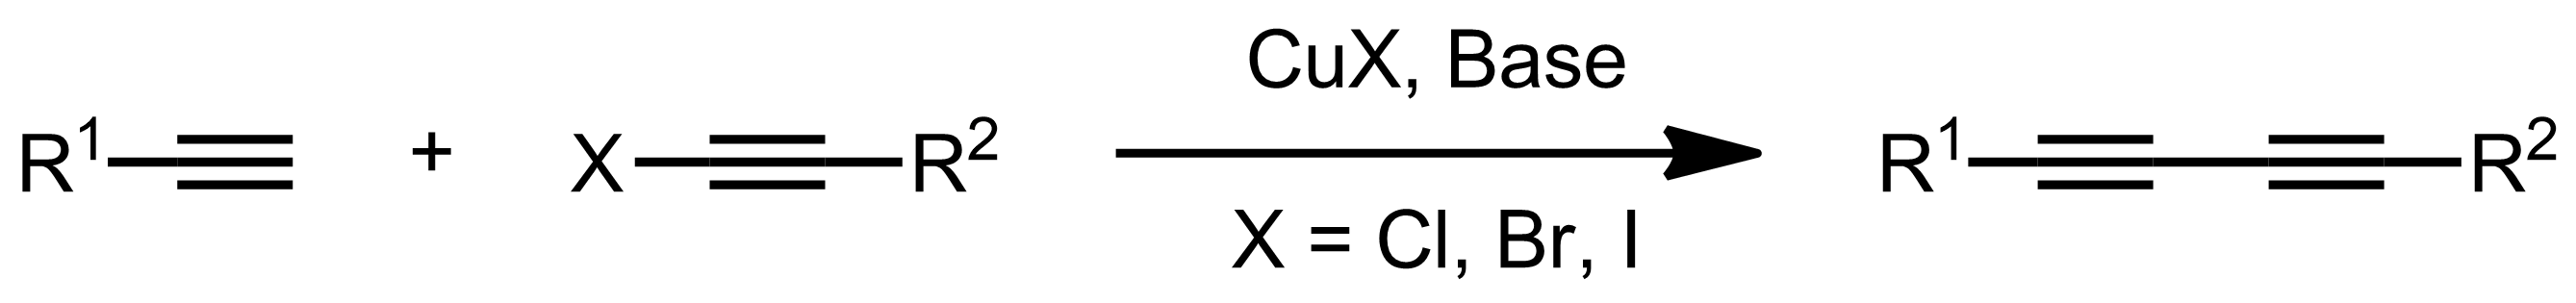 Schematic representation of the Cadiot-Chodkiewicz Coupling.